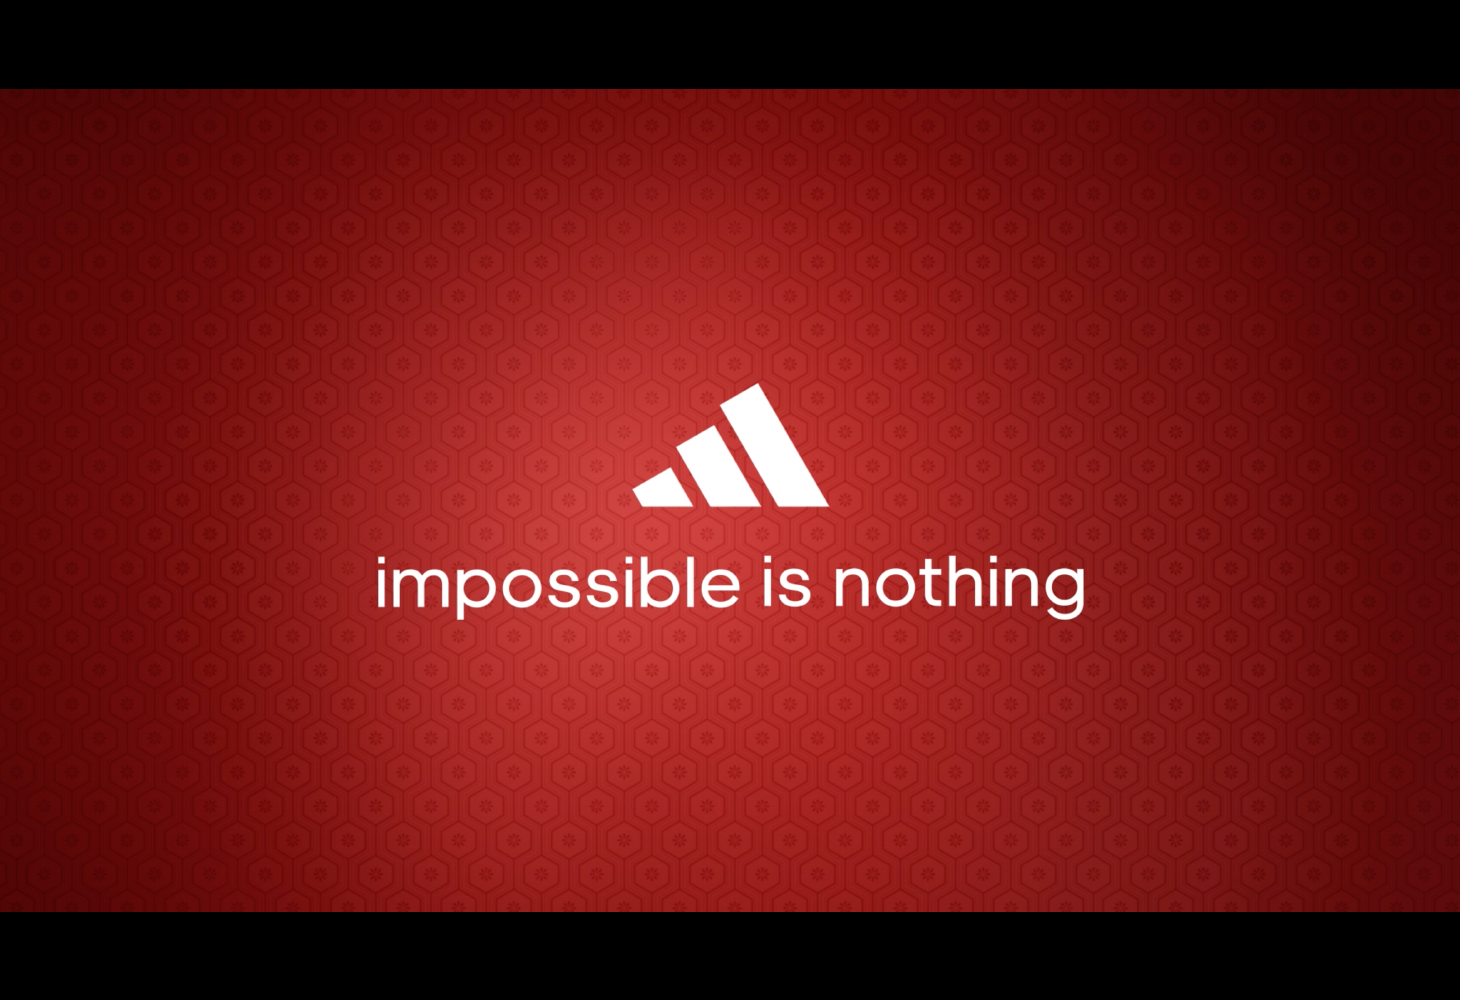 World Cup 2022 — Adidas - IIS Impossible is nothing